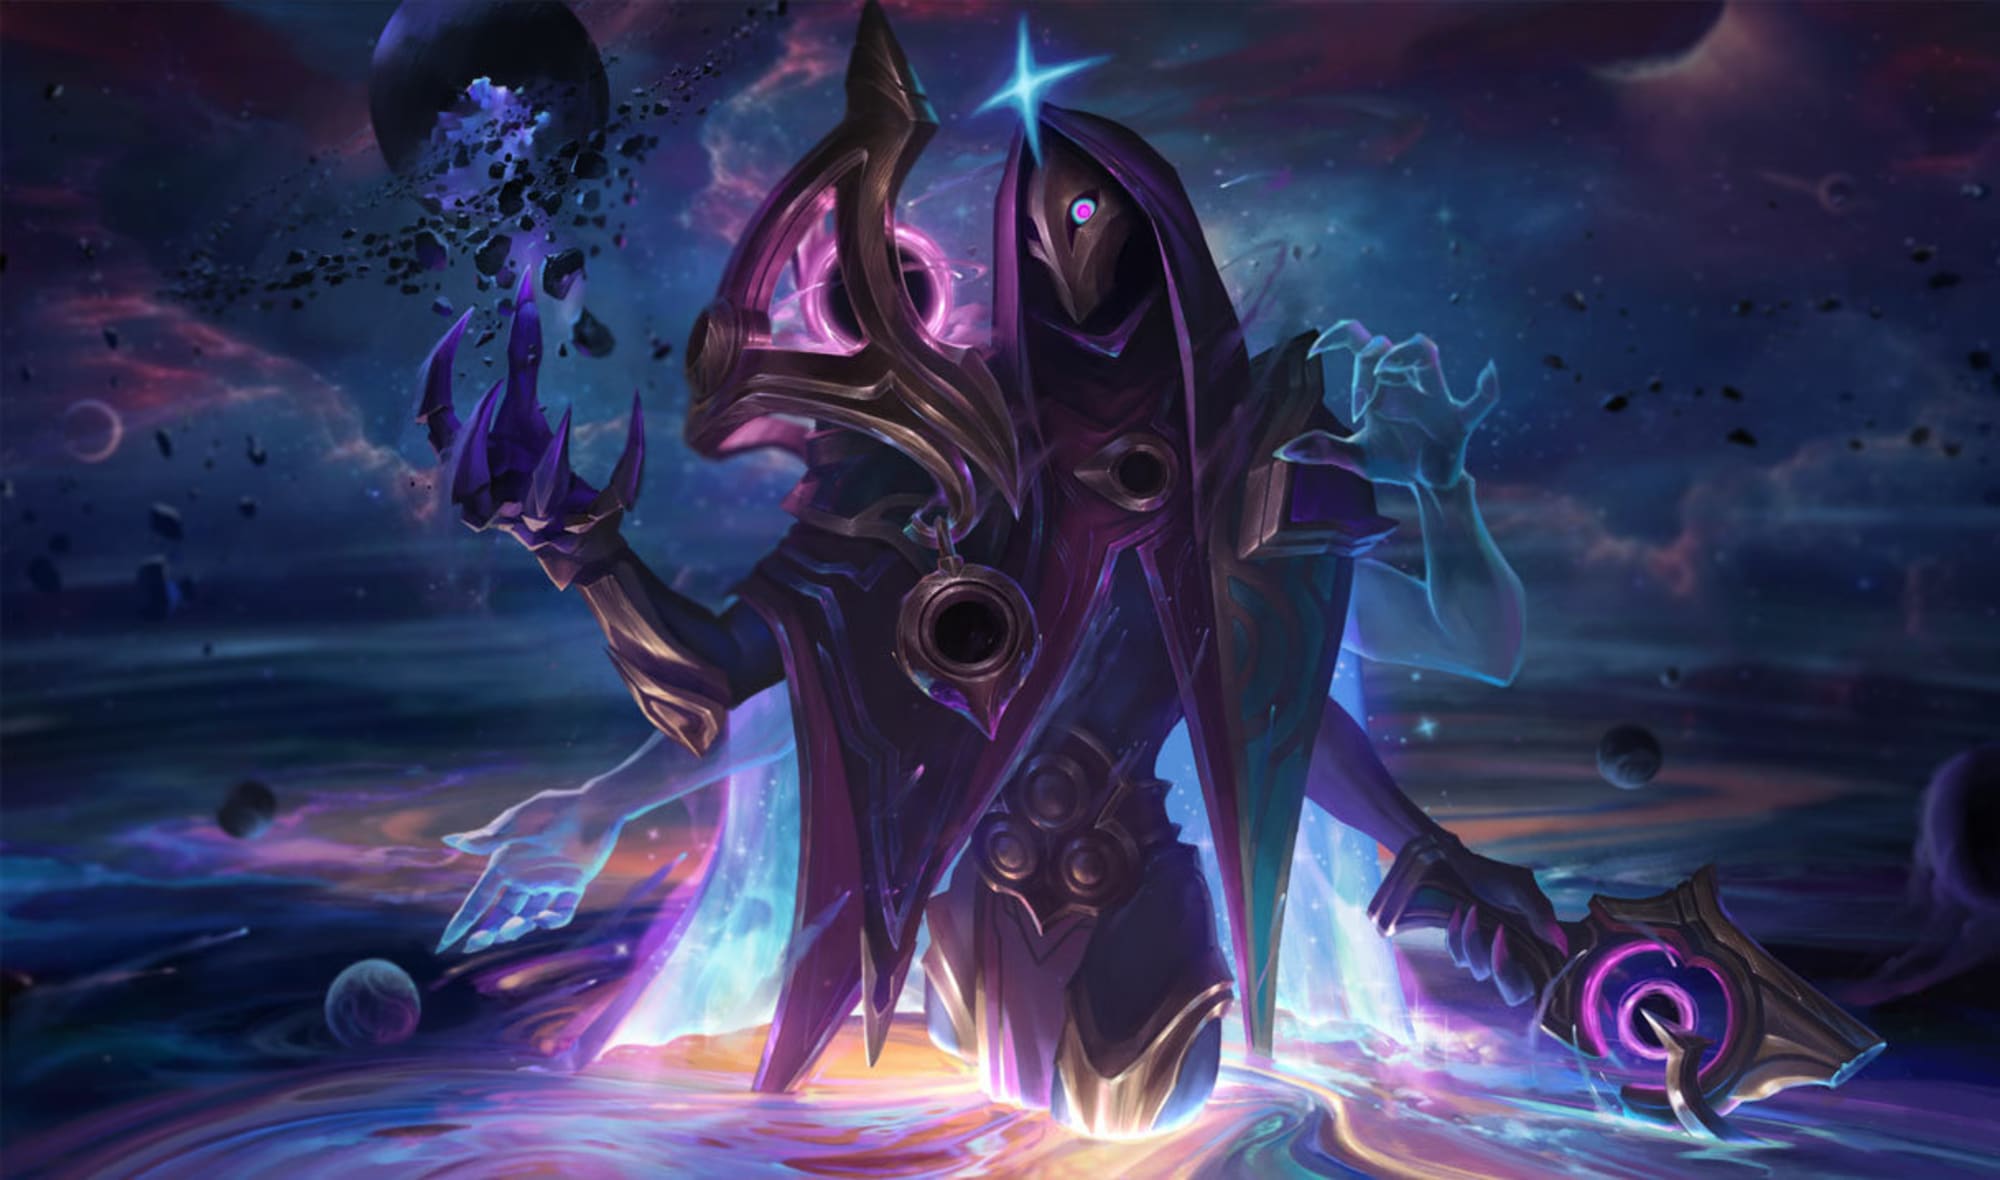 Tft Comps Top 5 Champions To Build Comps Around In Patch 10 14